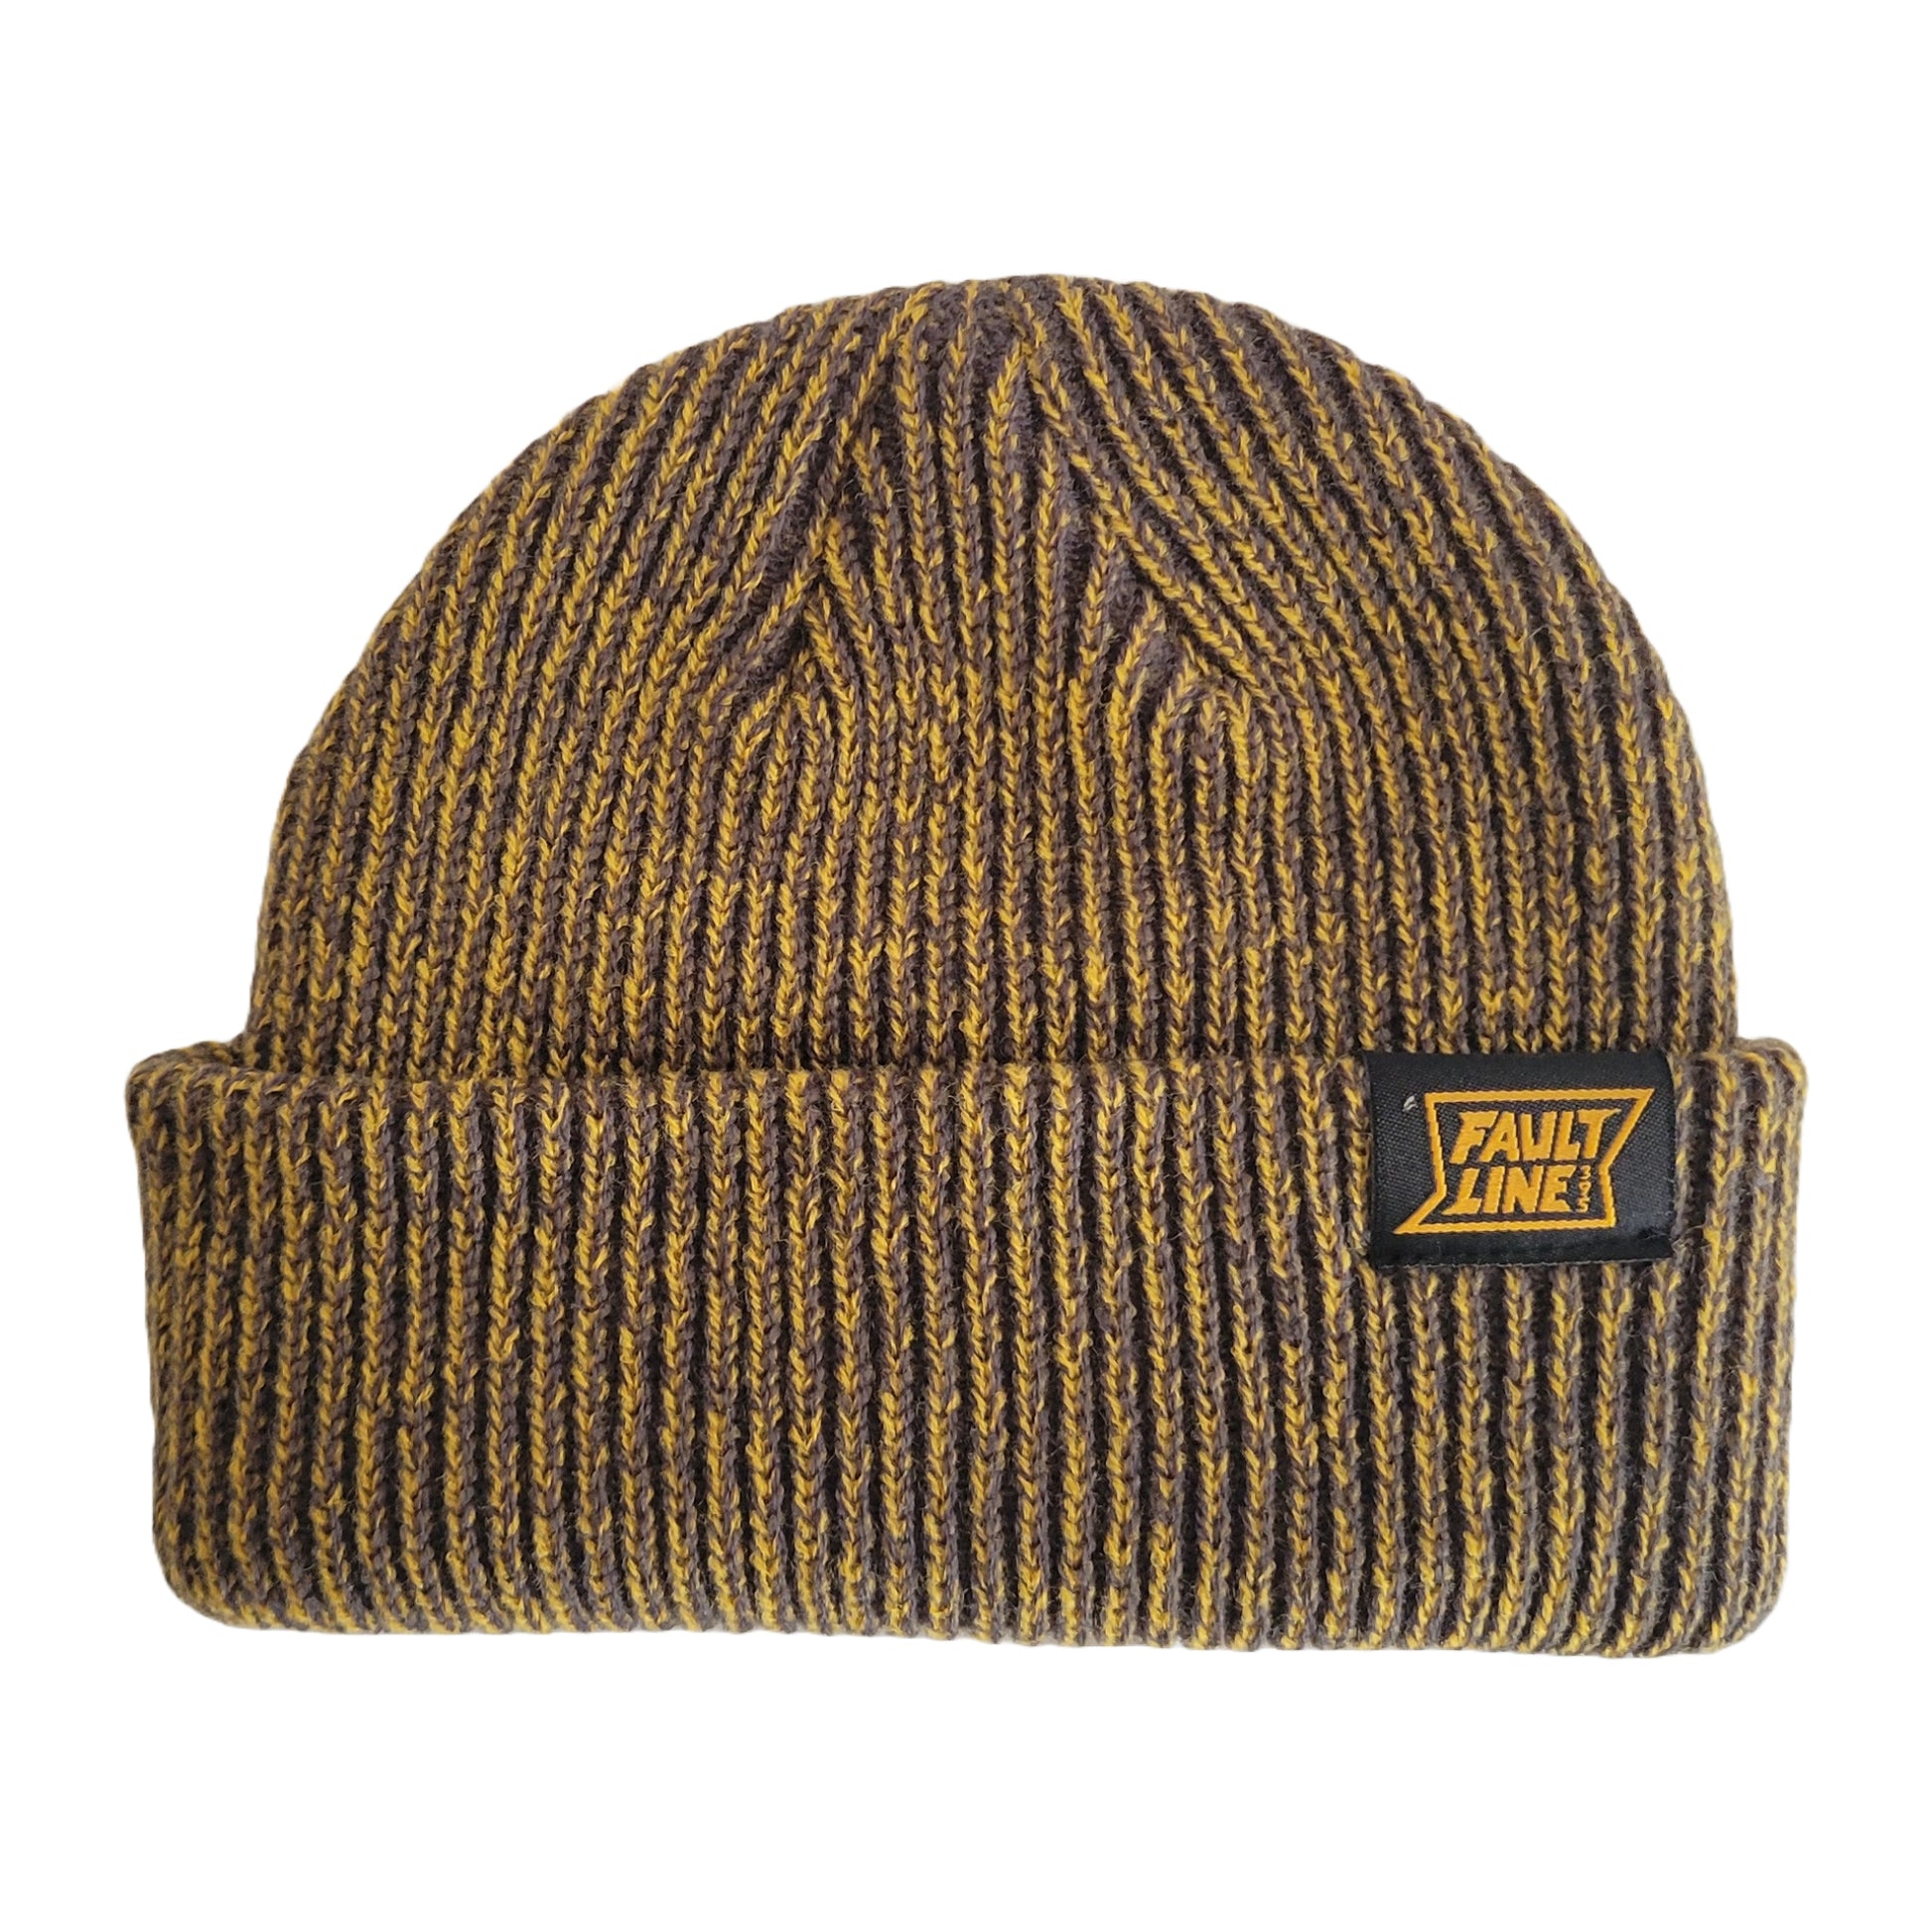 Broadway Faultline395 | – - FaultLine395 Beanie Charcoal/Gold